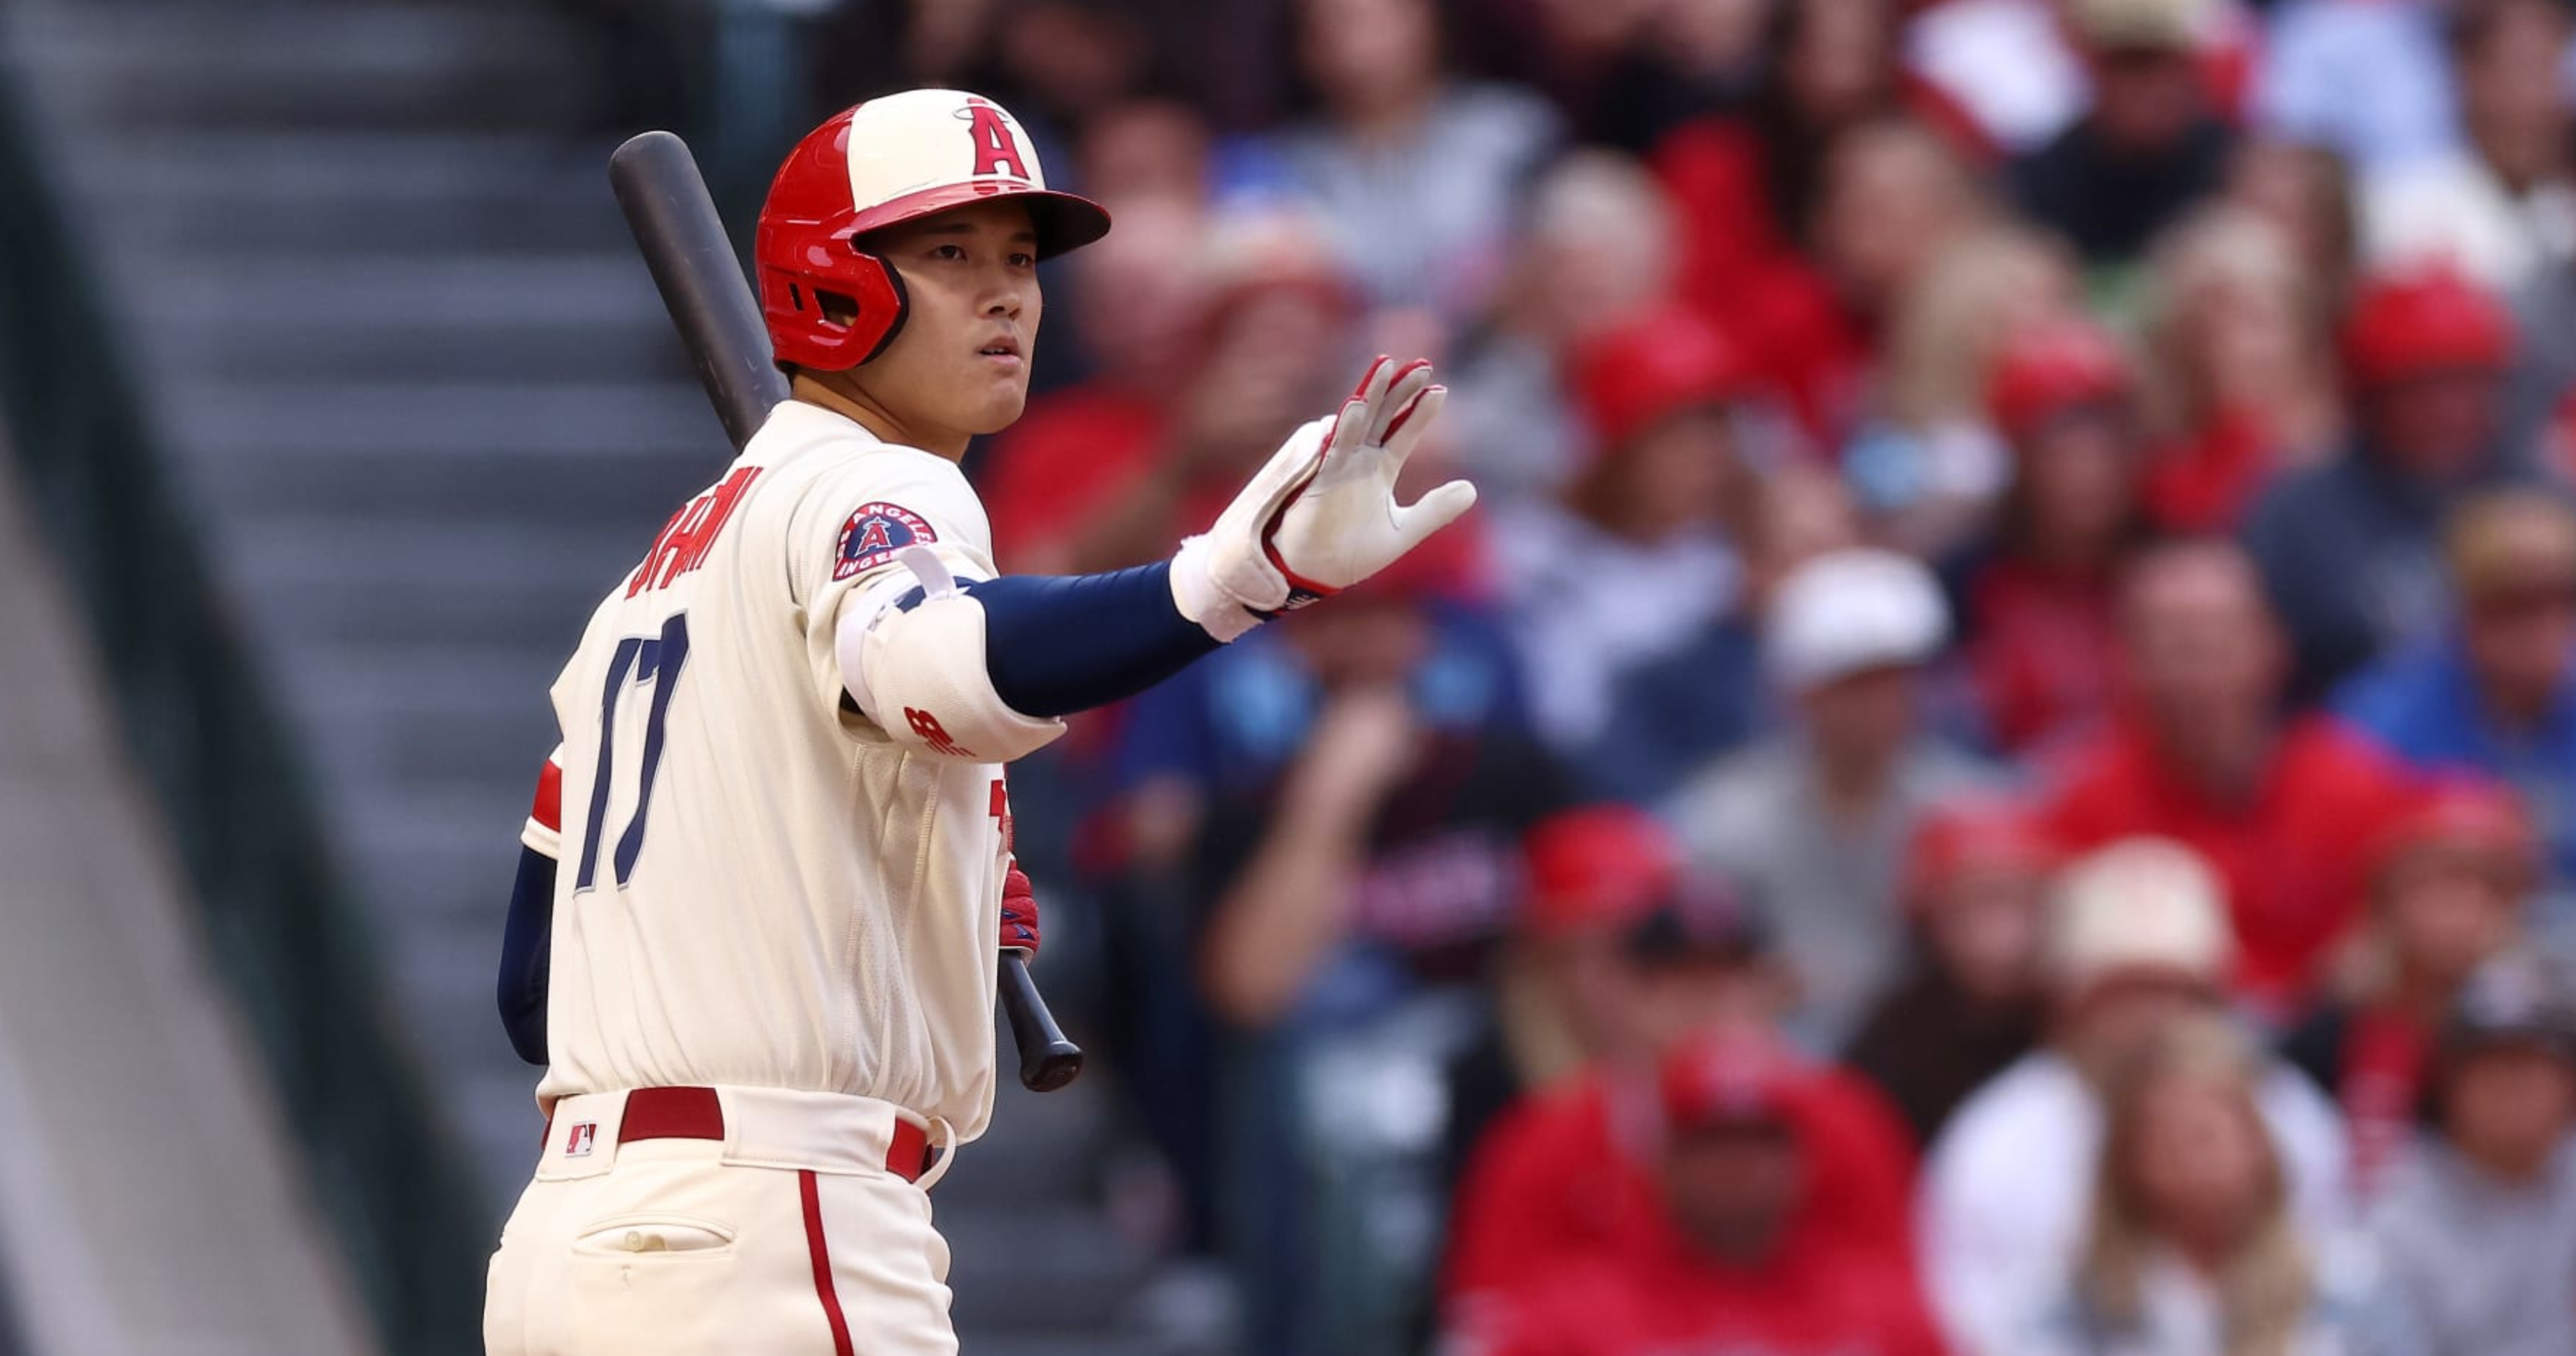 Pedro Martinez believes Shohei Ohtani is going to sign with Red